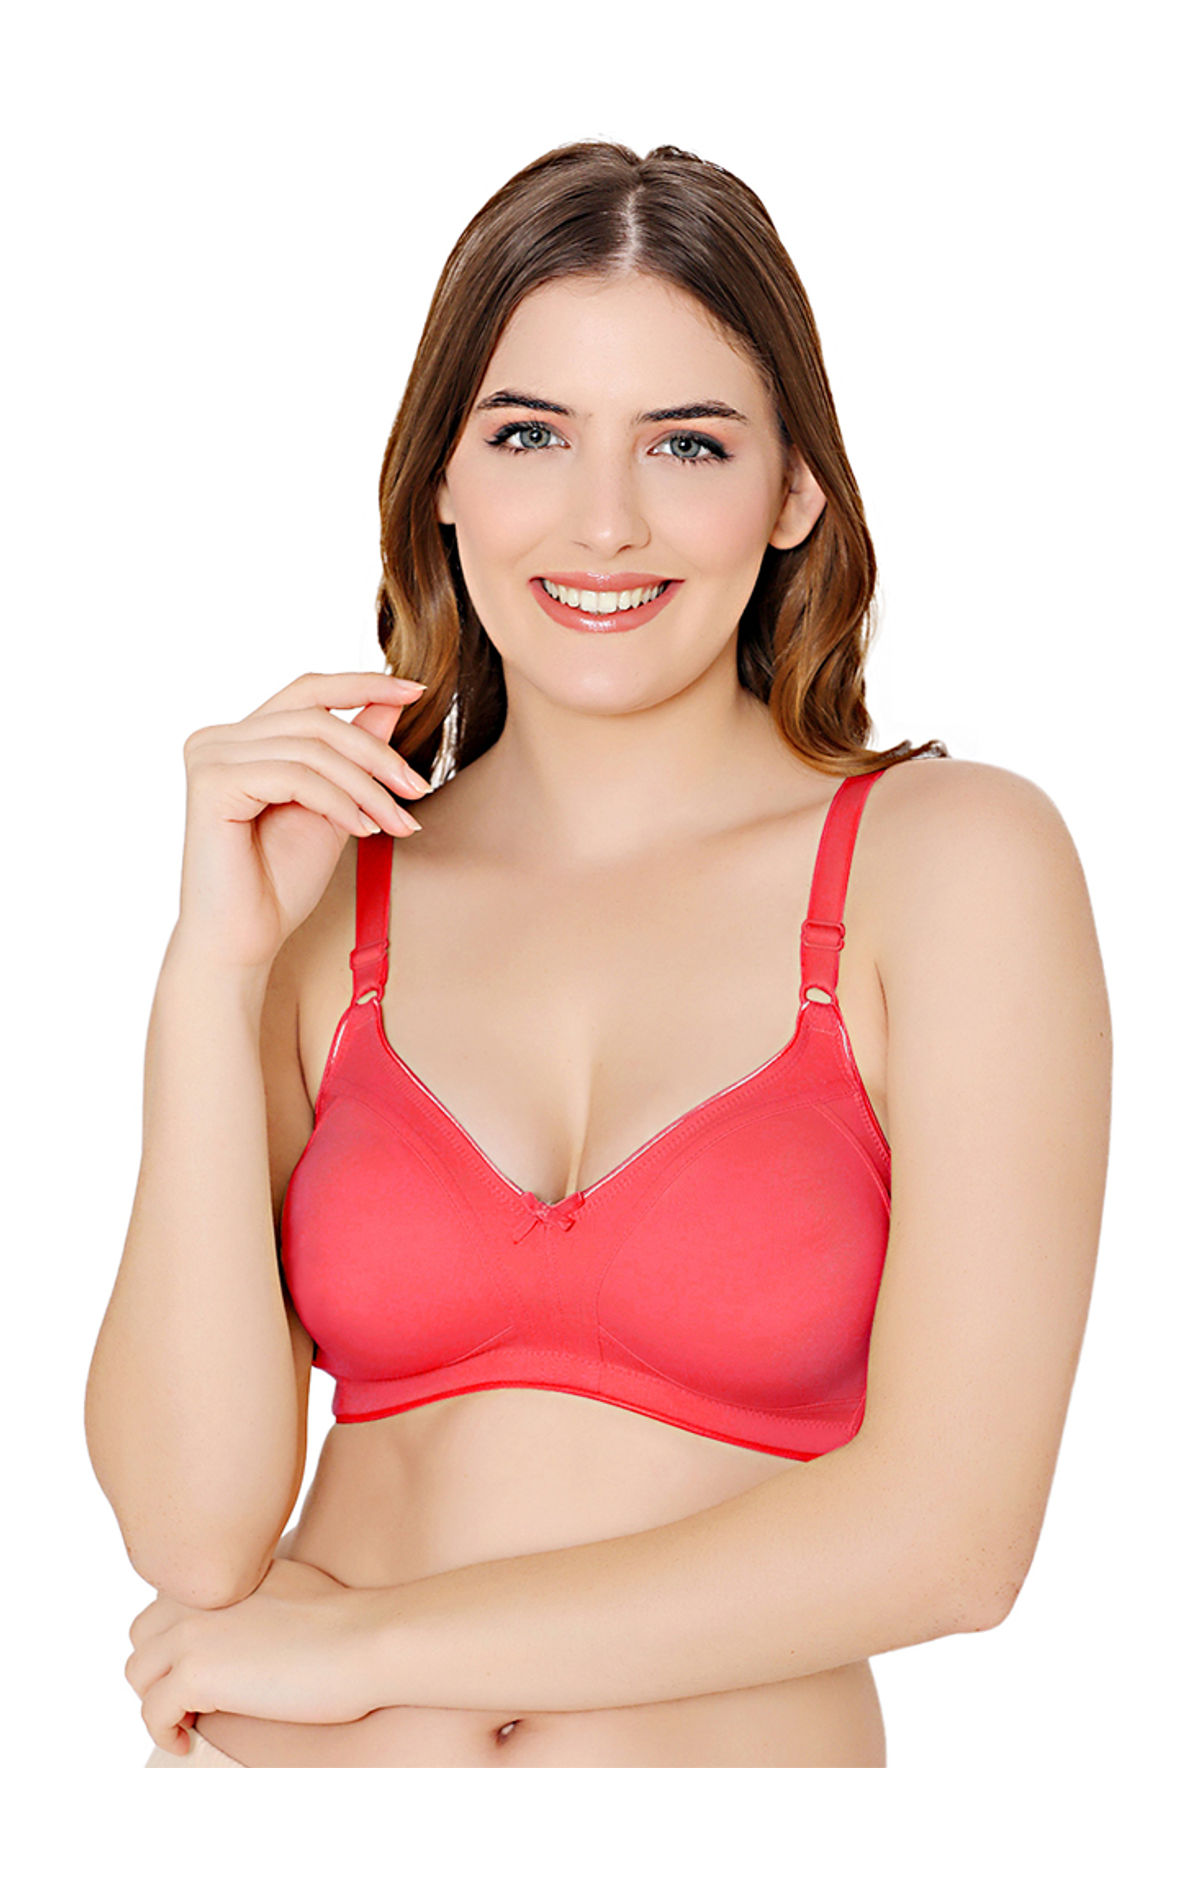 Ladies Full Moulded Cup T Shirt Bra Straps Padded Underwire Underwear Sizes